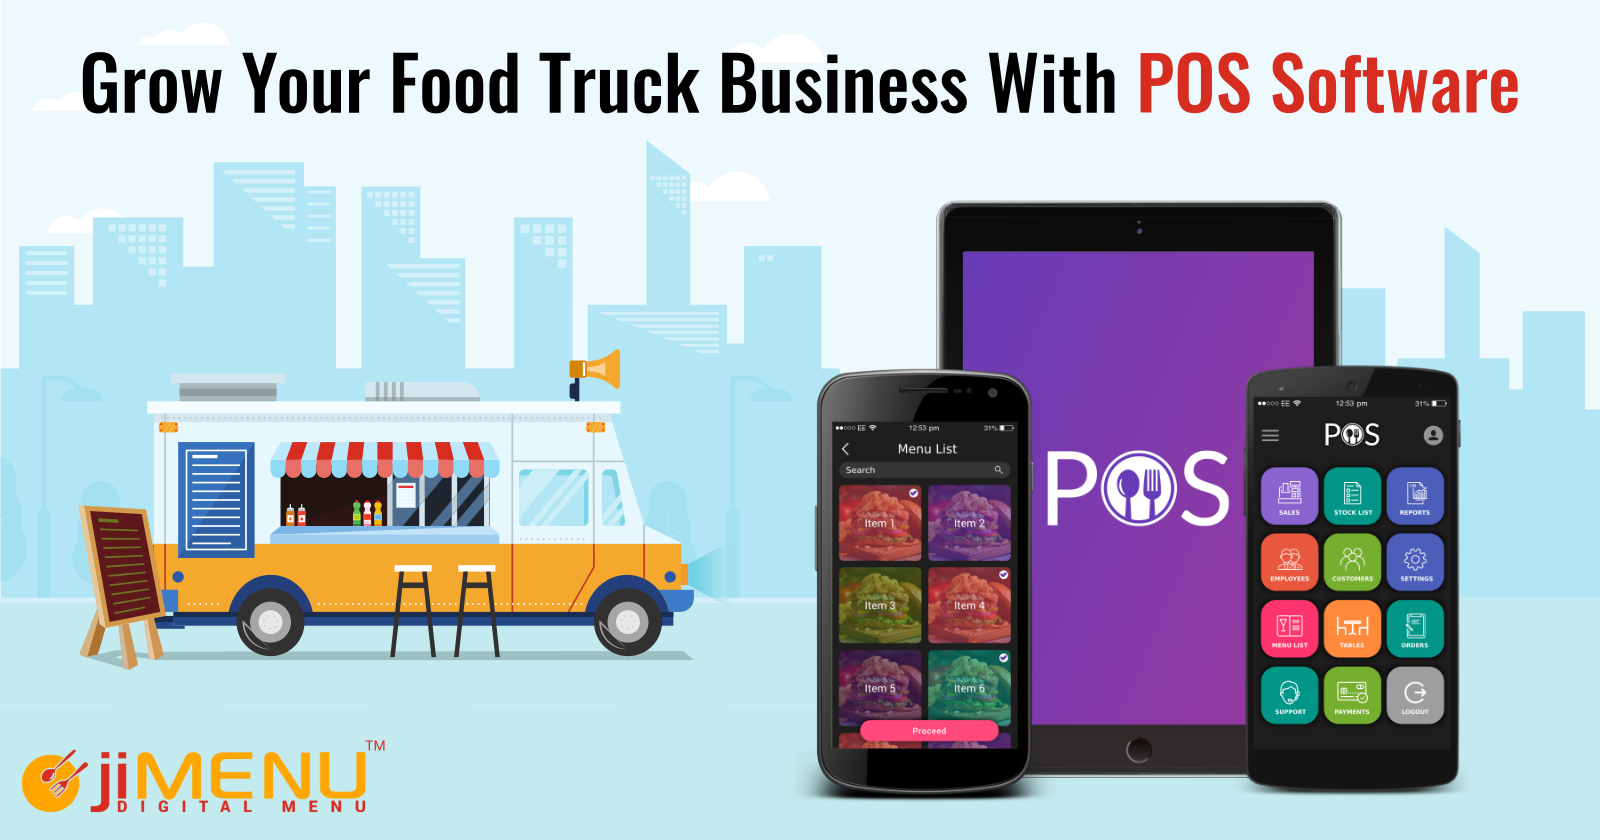 Grow Your Food Truck Business With POS Software